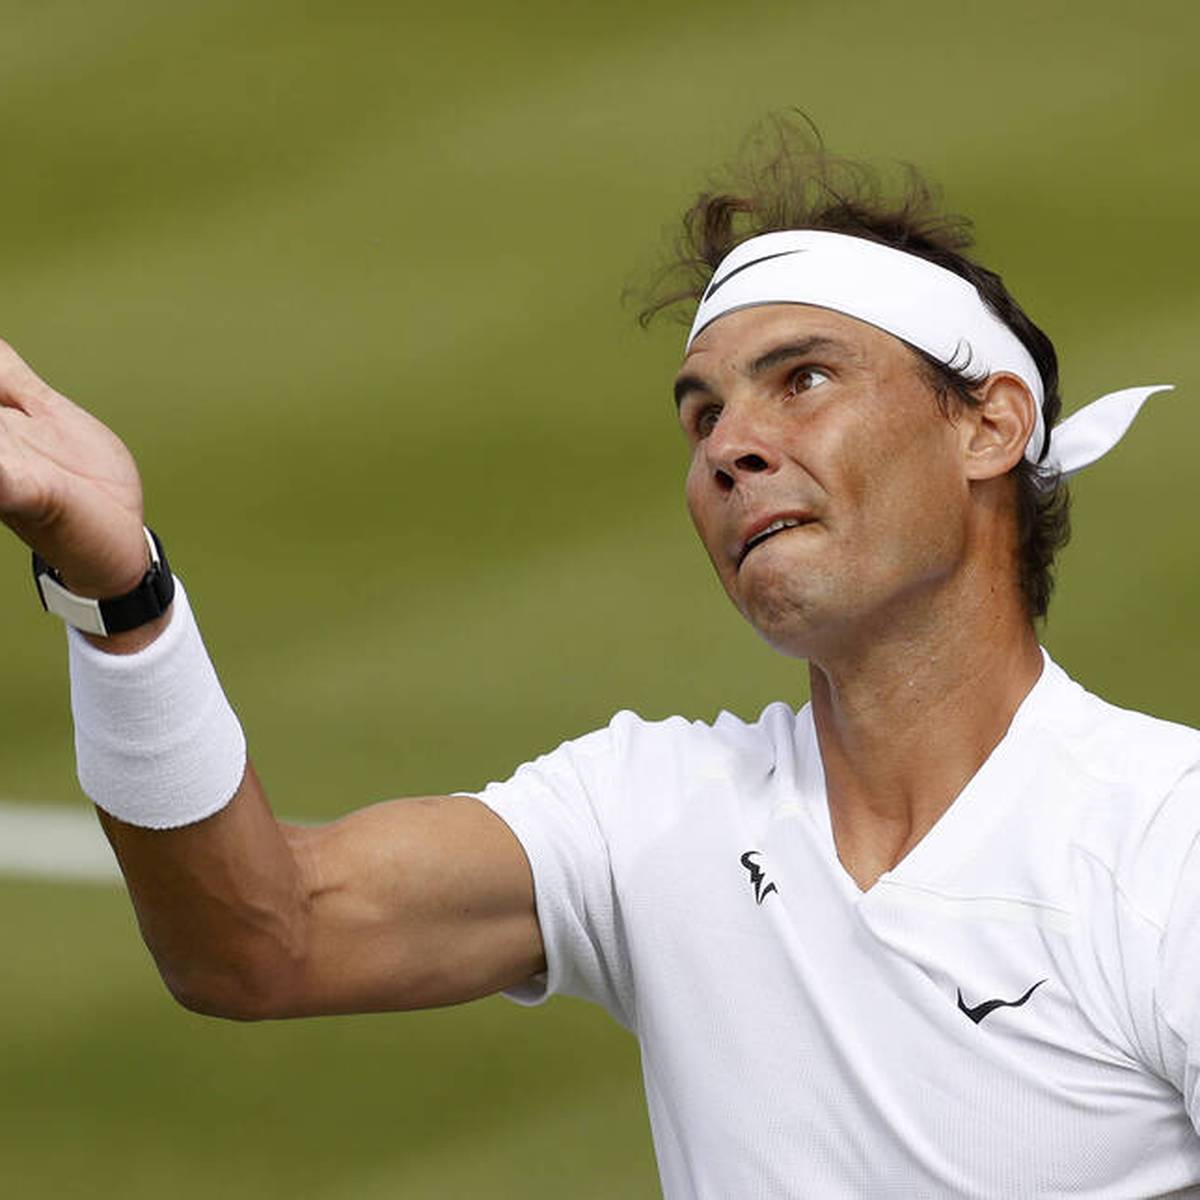 French Open: So schlecht ging es Nadal